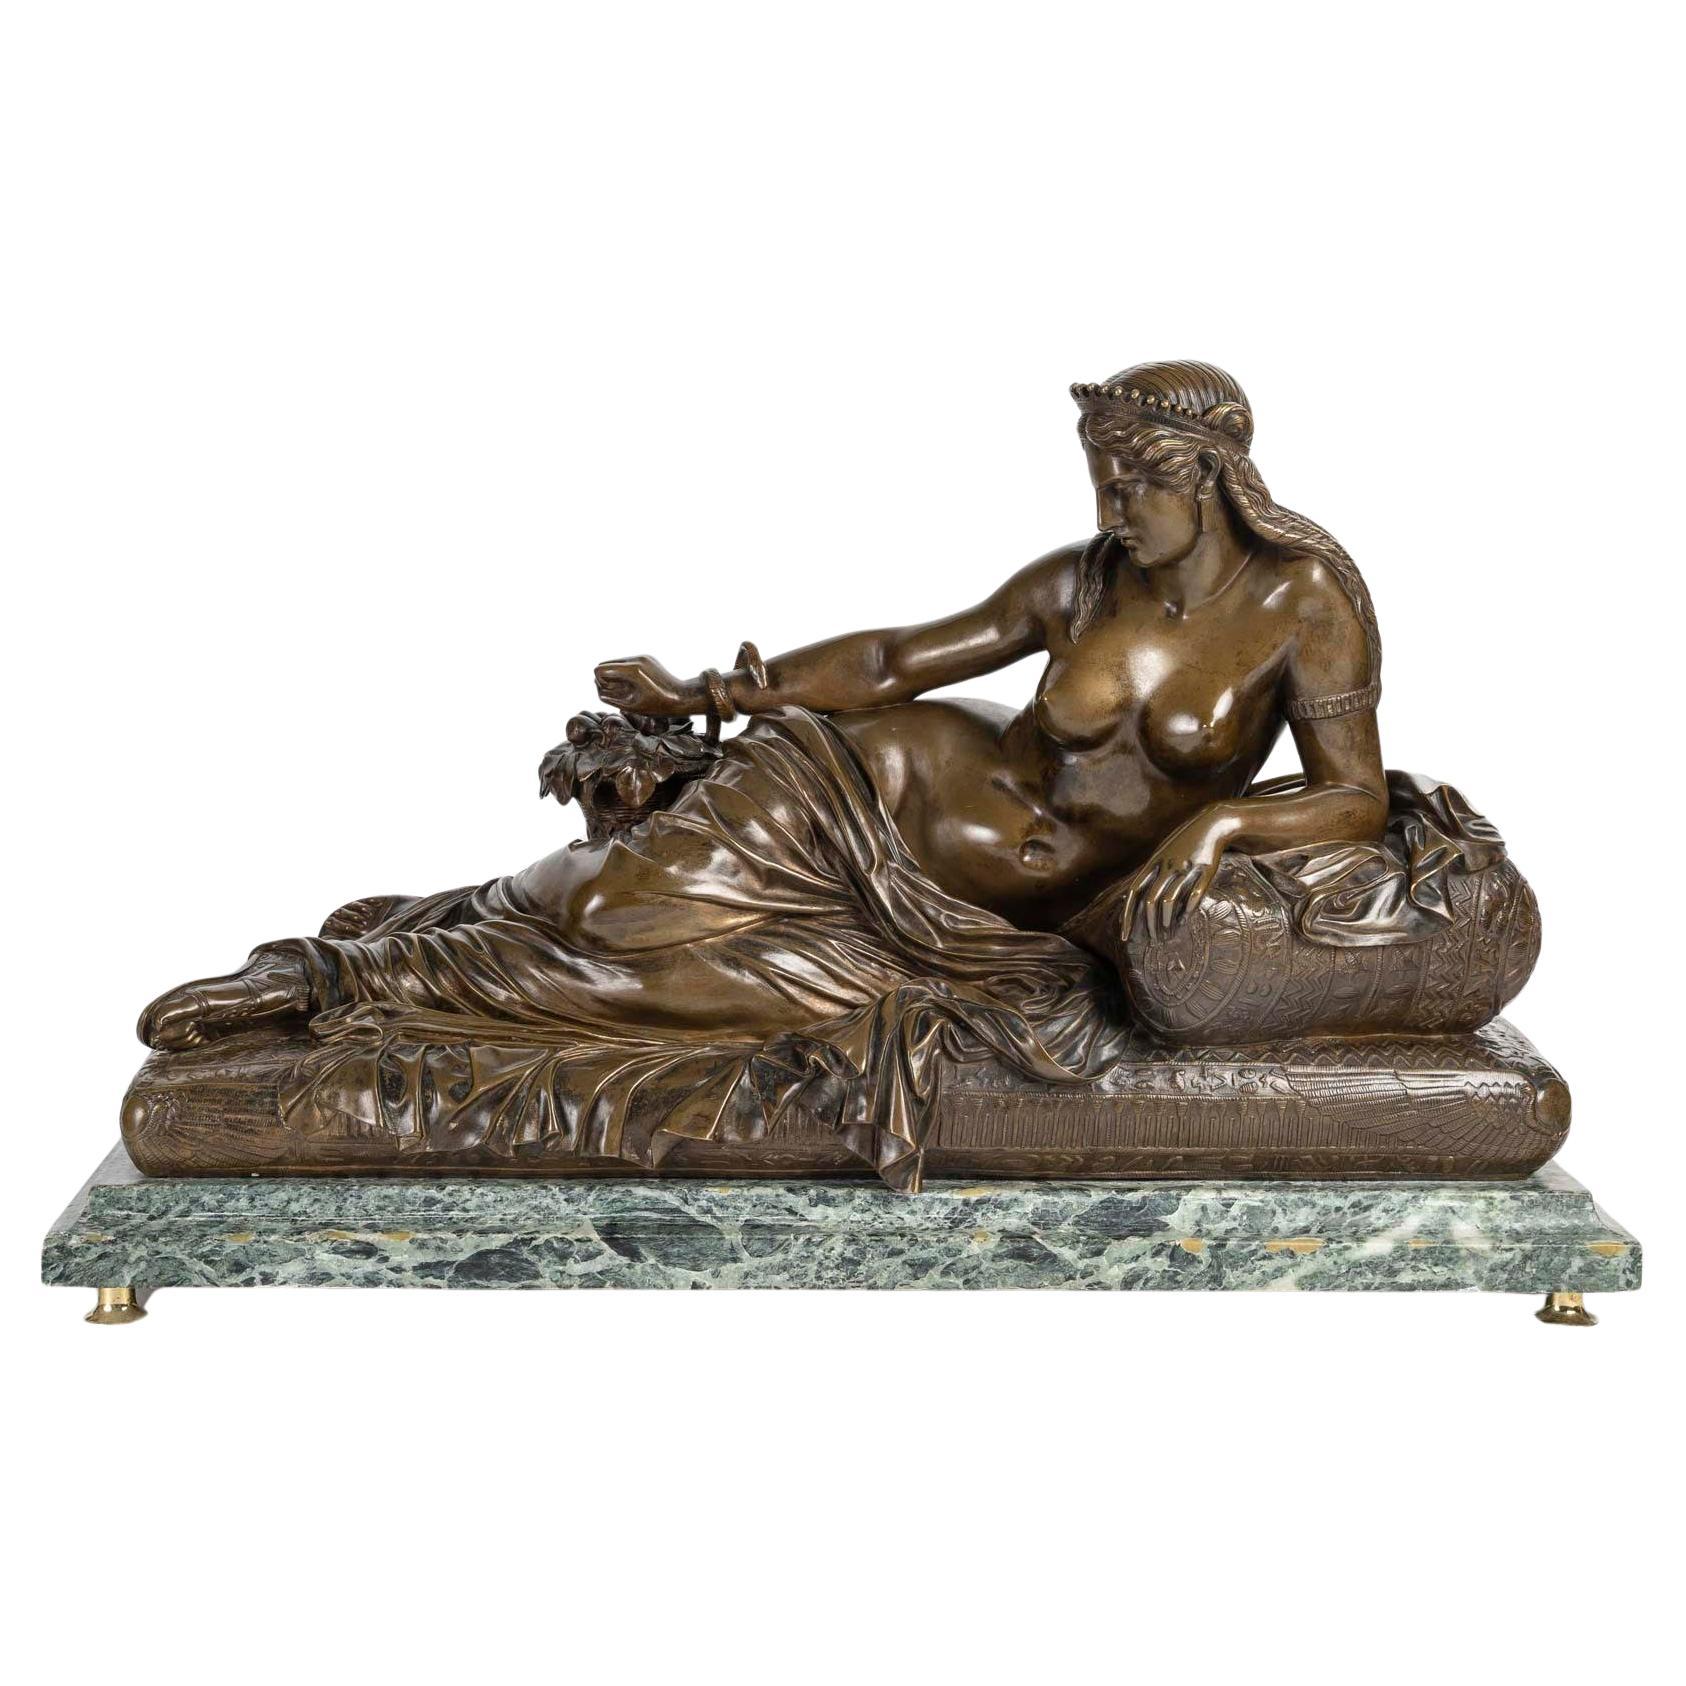 Sculpture of Cleopatra Reclining, Sculpture Signed Barbedienne, Napoleon Period. For Sale